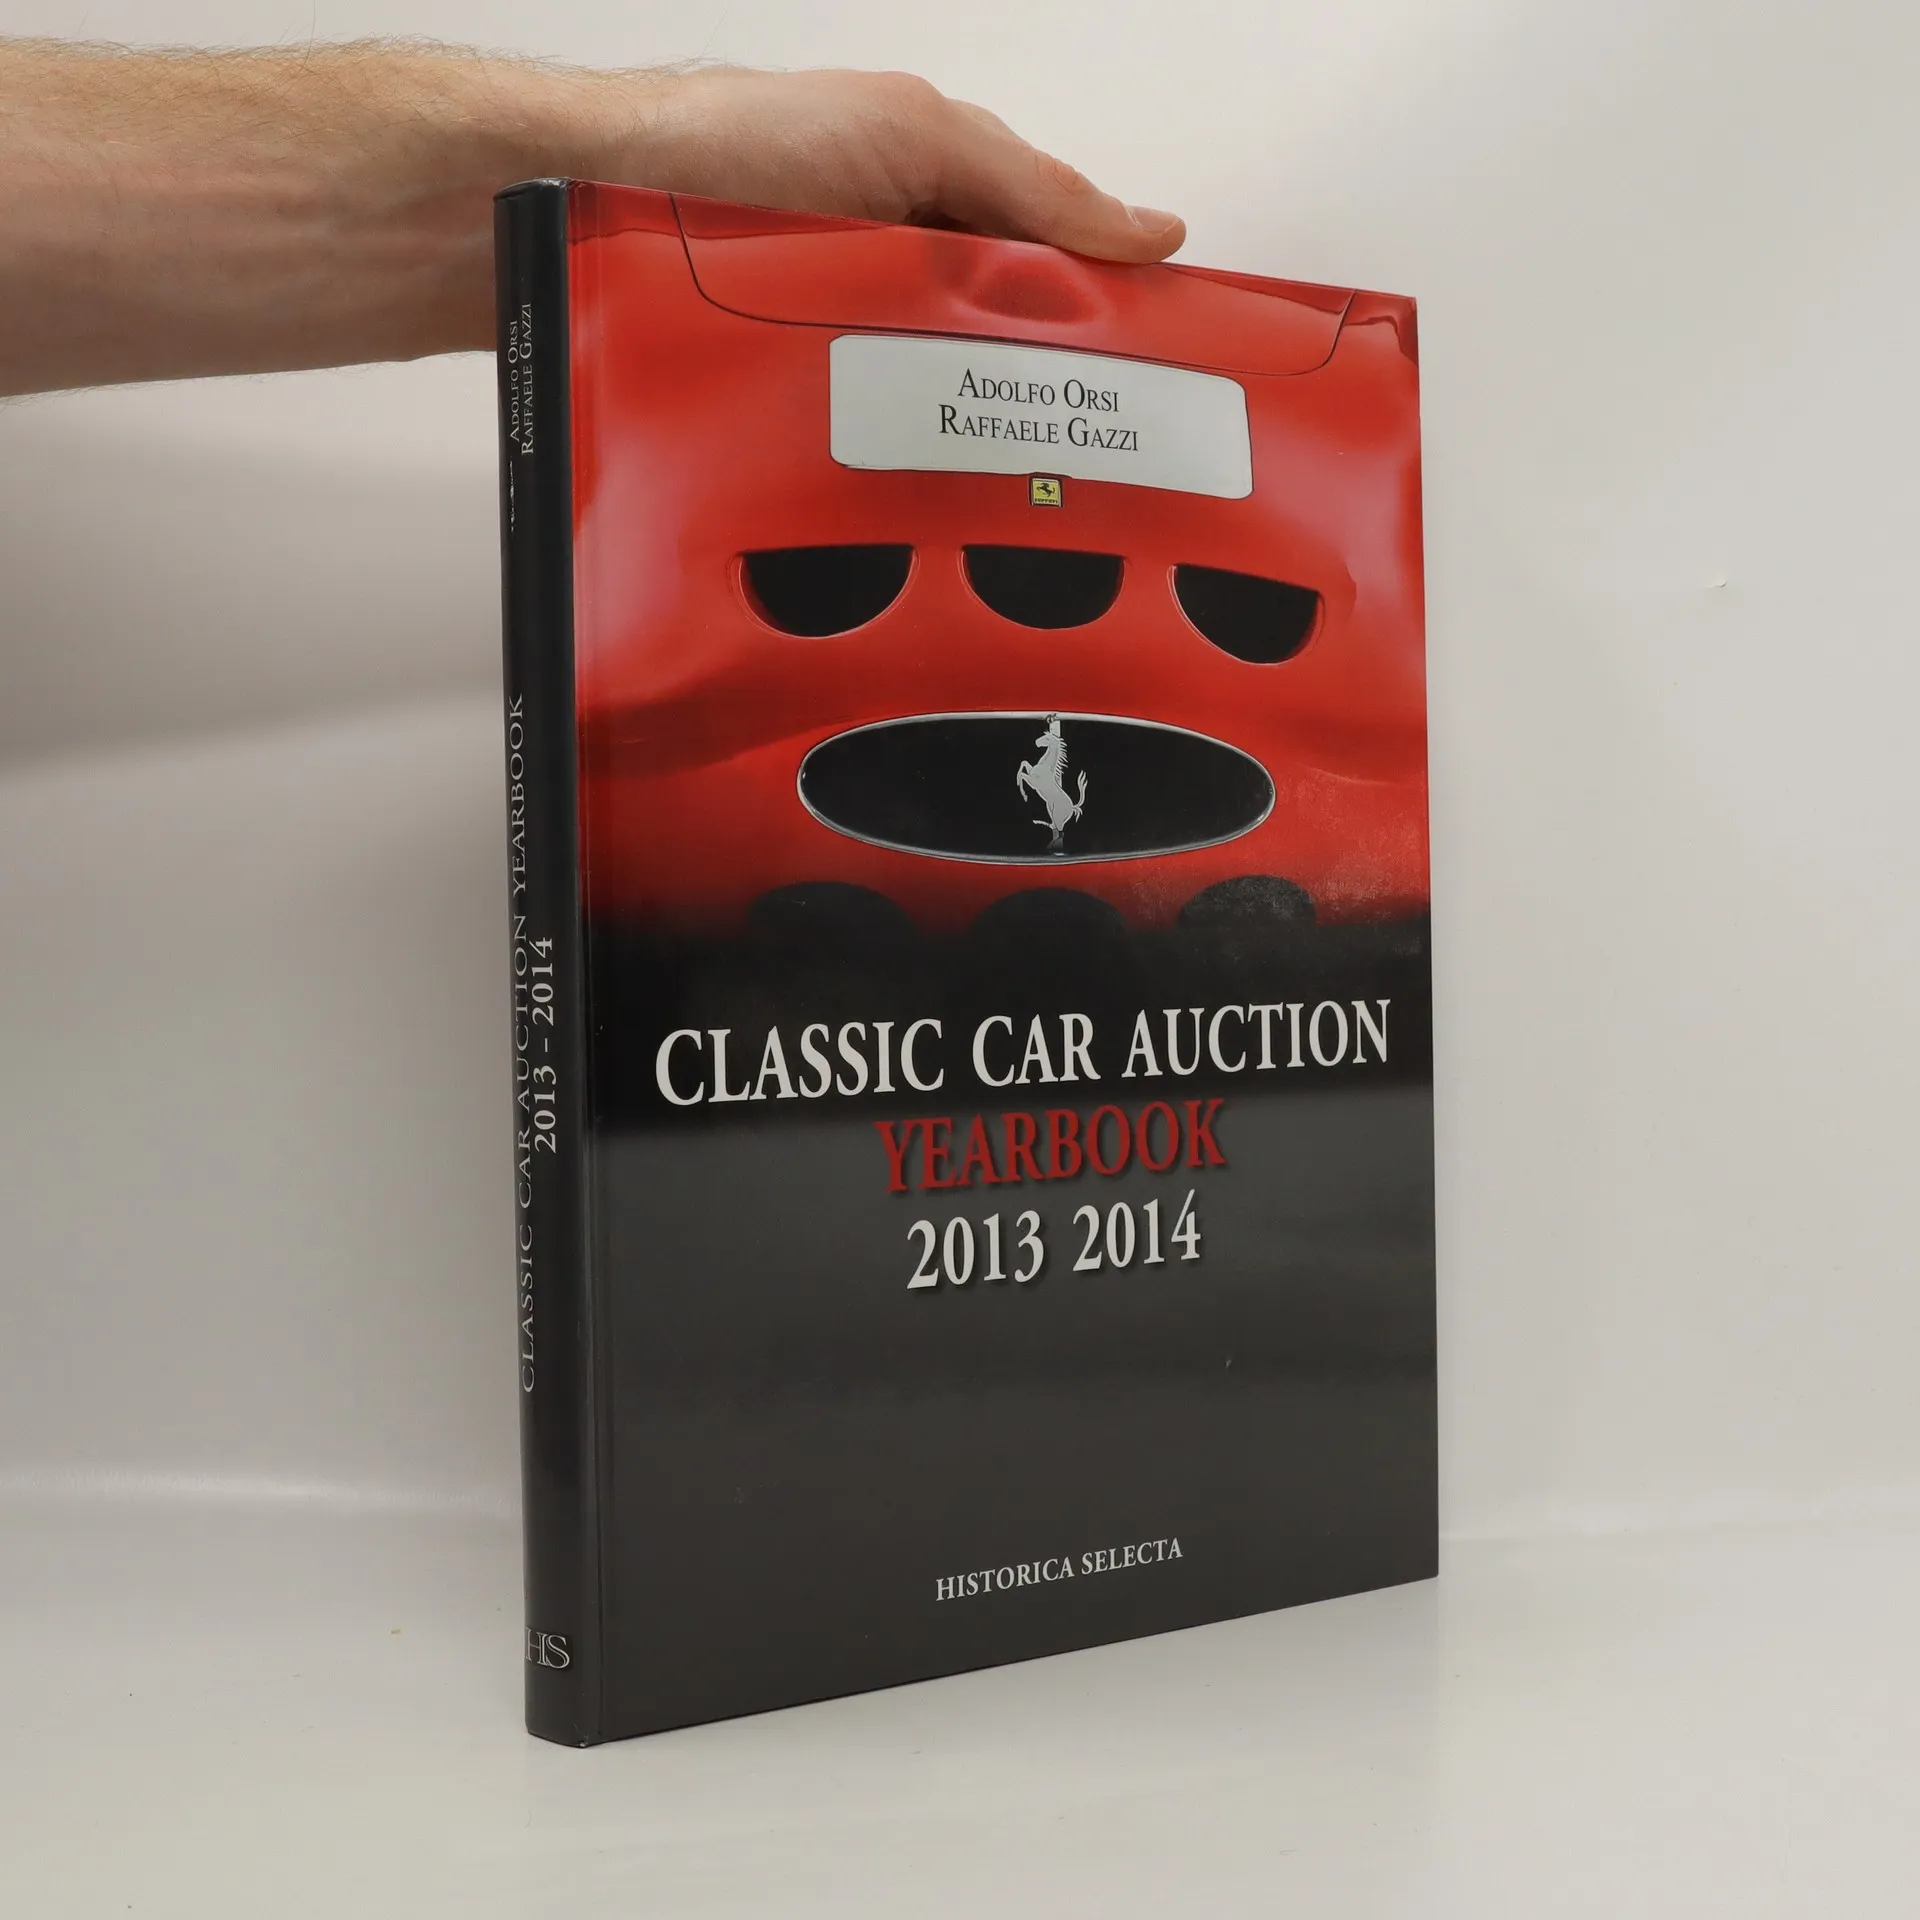 Classic Car Auction Yearbook 2013 2014 - Adolfo Orsi - knihobot.cz